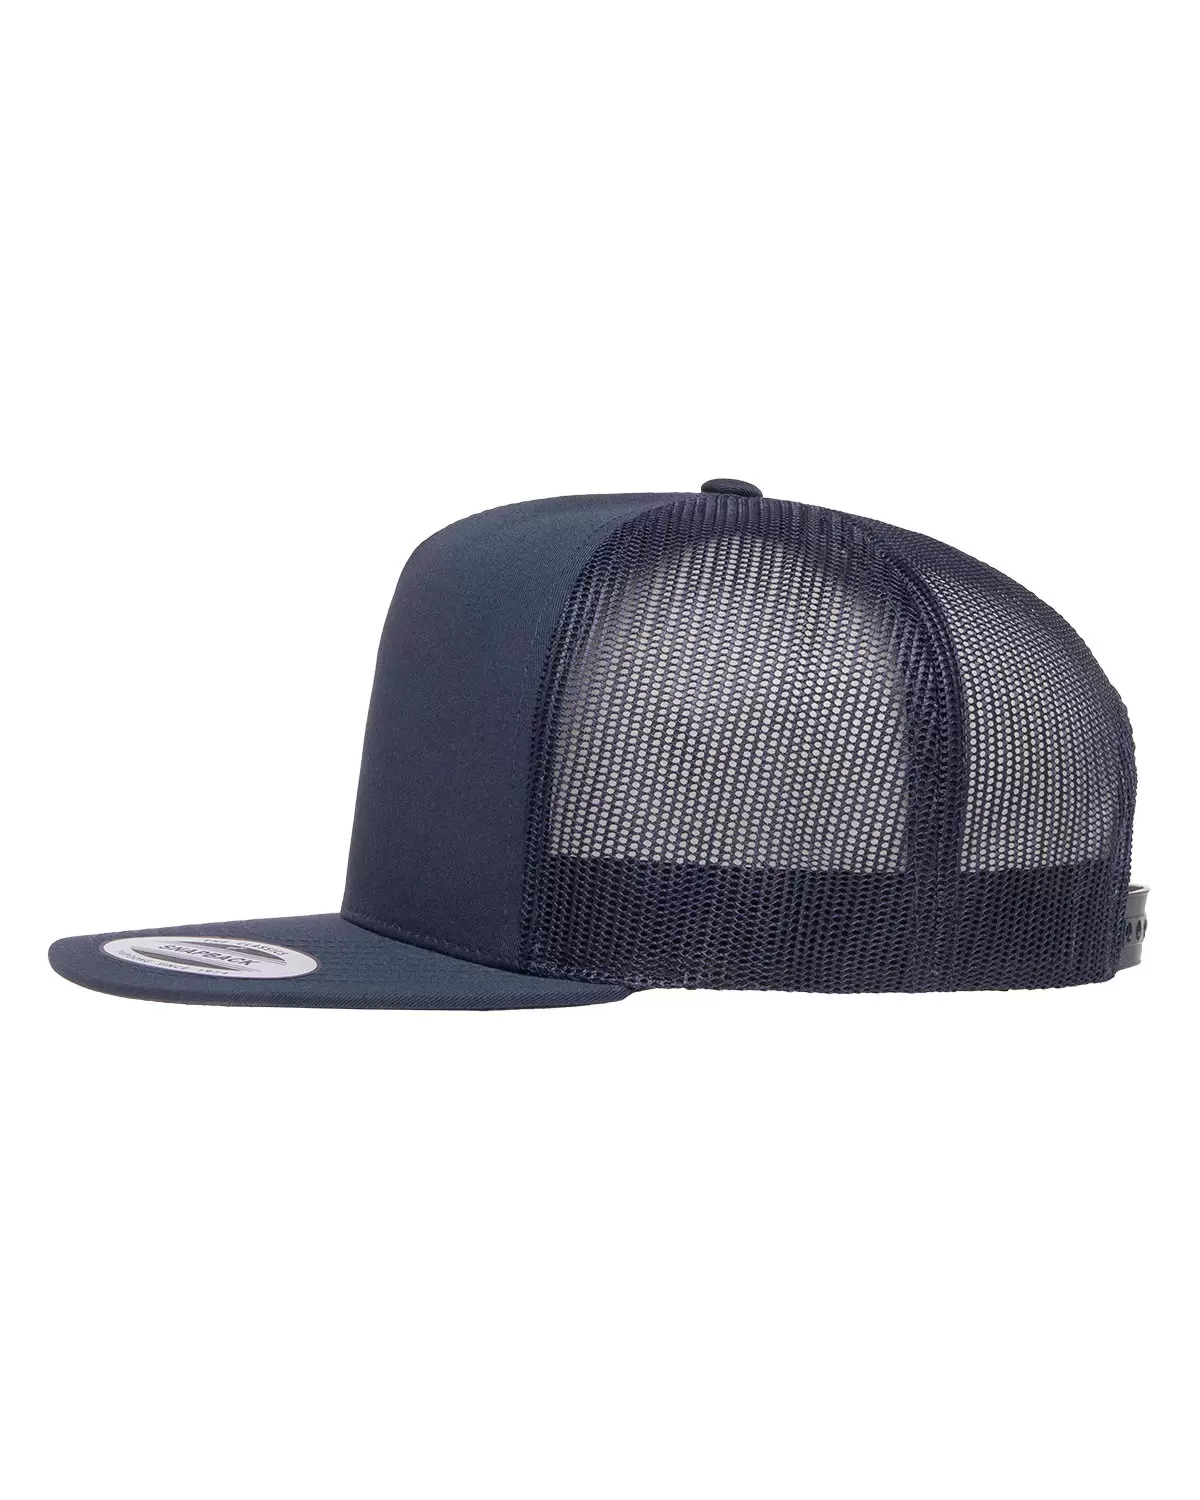 Yupoong-Flex Fit 6006 Five-Panel Classic Trucker Cap - From